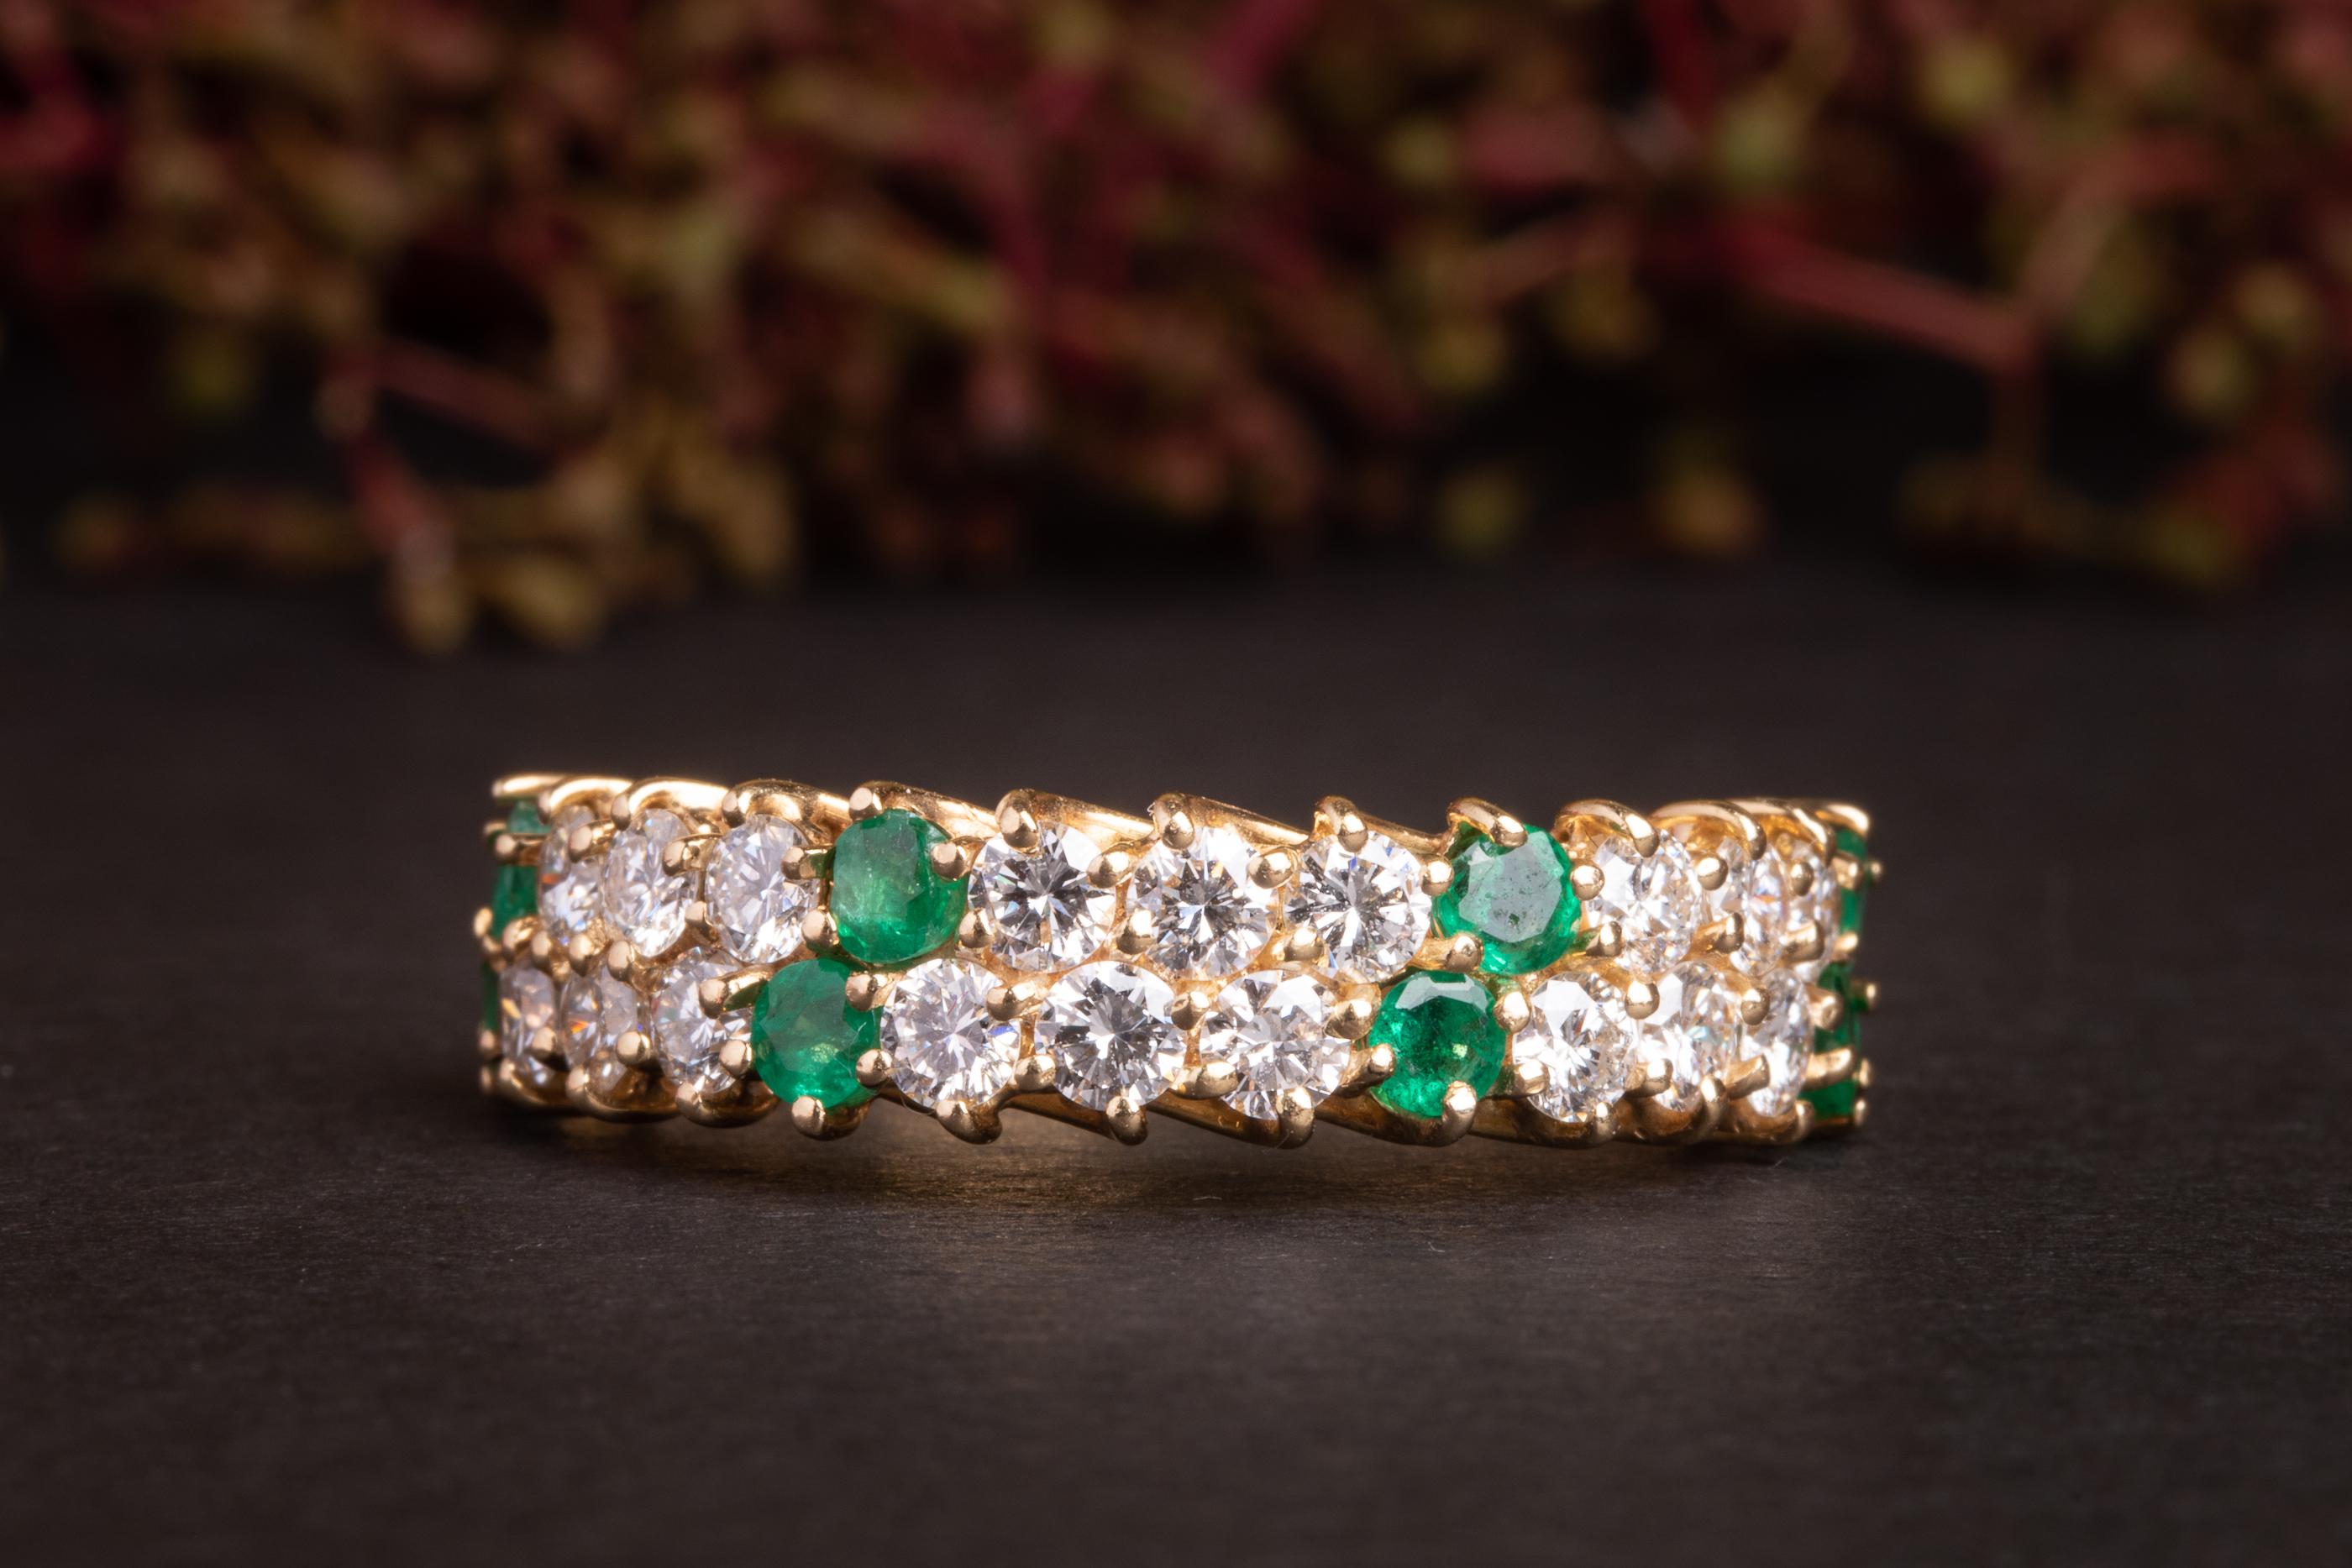 Such a striking and very LARGE statement diamond and emerald ring! This marvelous cocktail ring is made of solid 18 ct yellow and is a true show stopper! It weights whooping 6g and is a one-off unique gem!

Bold, beautiful and definitely an ultimate